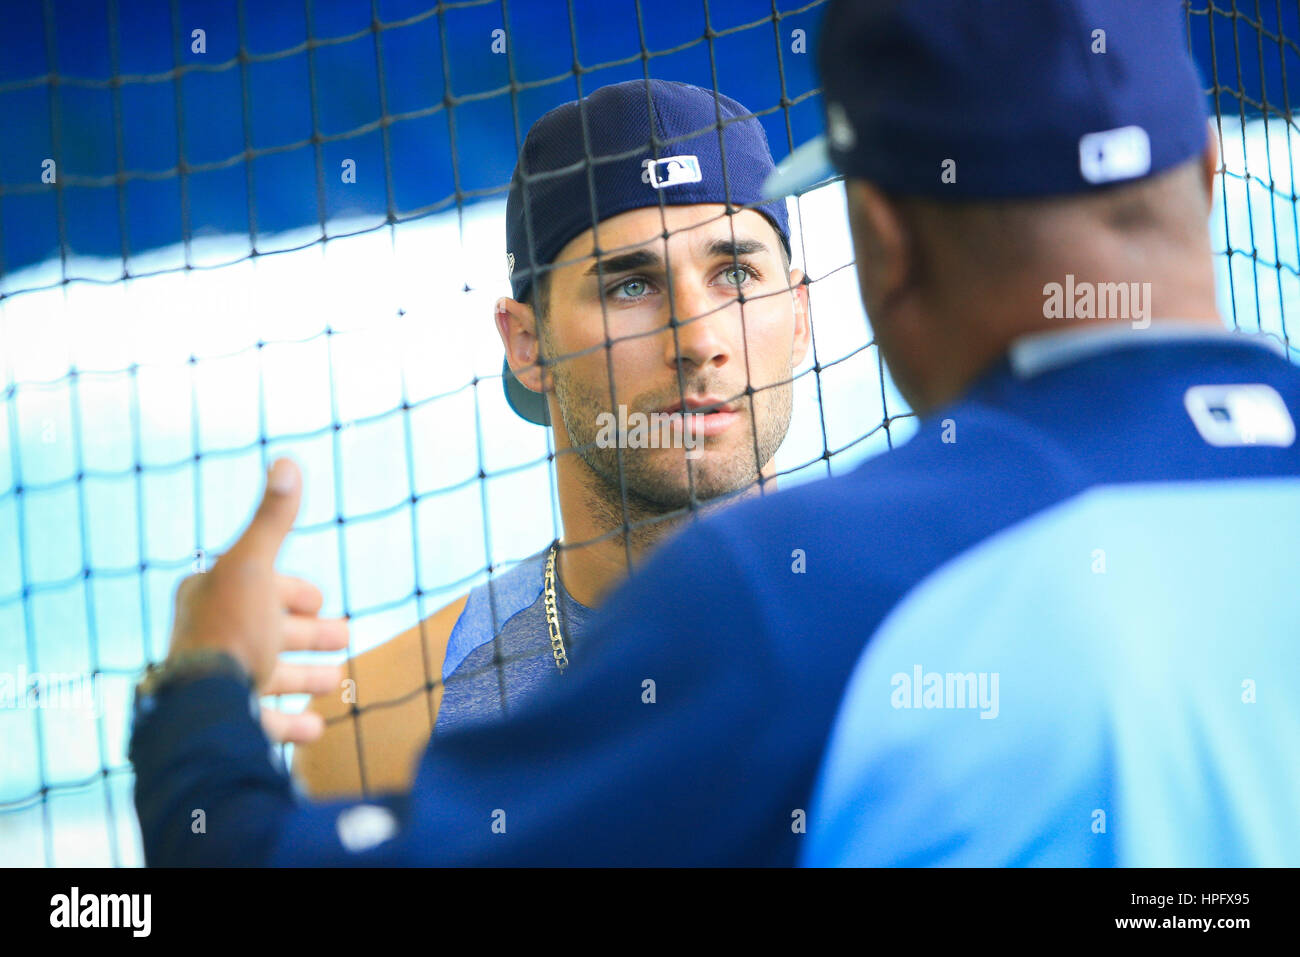 Port Charlotte, Florida, USA. 22nd Feb, 2017. WILL VRAGOVIC | Times.Tampa Bay Rays center fielder Kevin Kiermaier (39) talks with a member of the coaching staff in the batting cage after wet weather cancelled on-field work at Charlotte Sports Park in Port Charlotte, Fla. on Wednesday, Feb. 22, 2017. Credit: Will Vragovic/Tampa Bay Times/ZUMA Wire/Alamy Live News Stock Photo